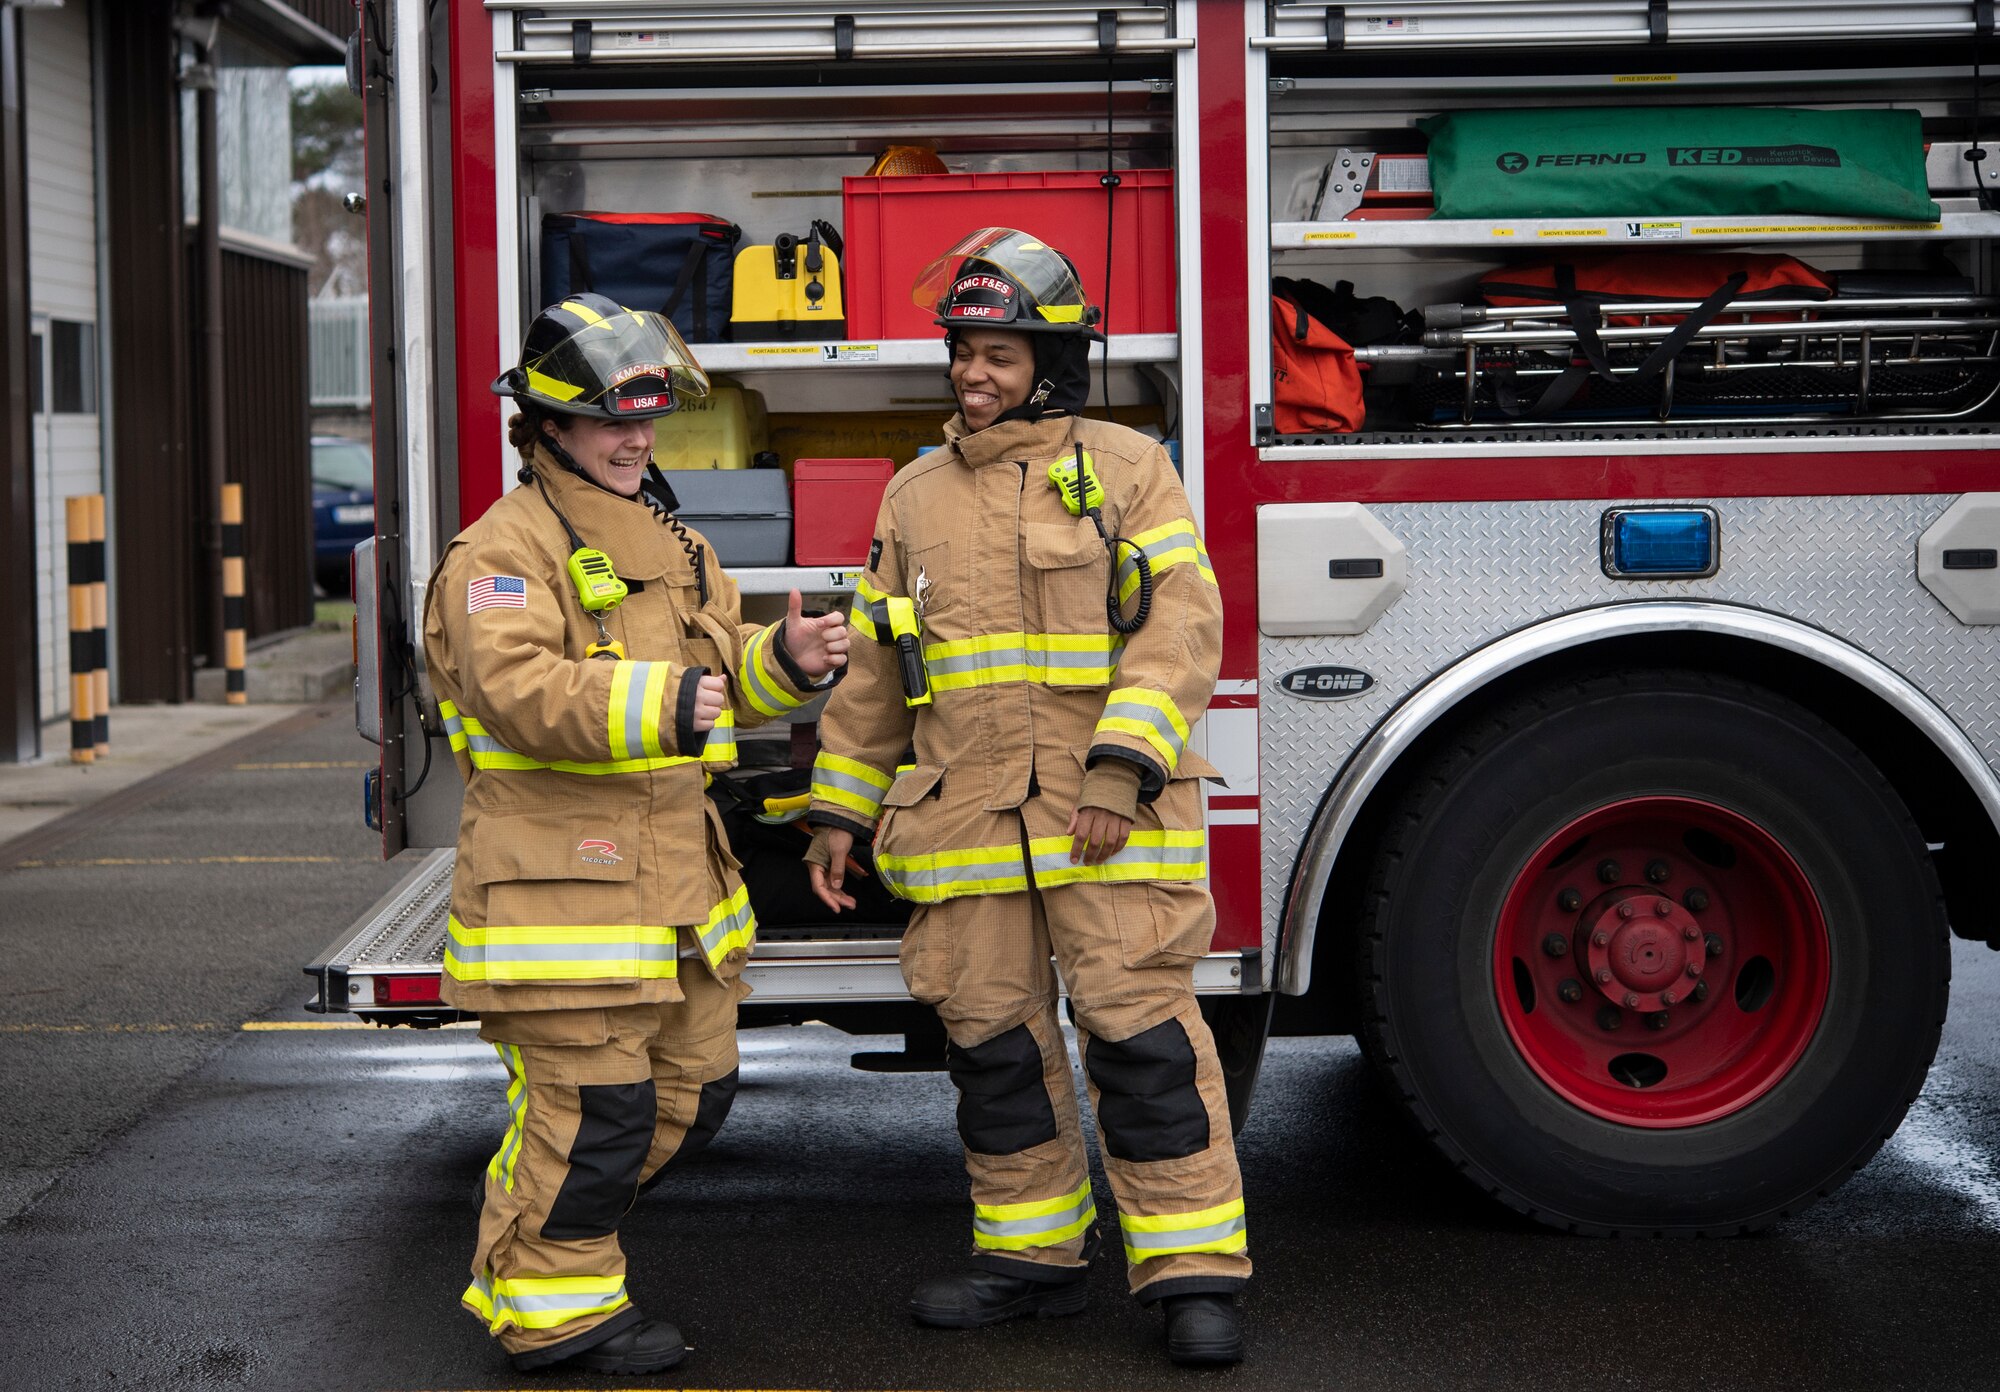 Two female firefighters laugh in front of a firetruck